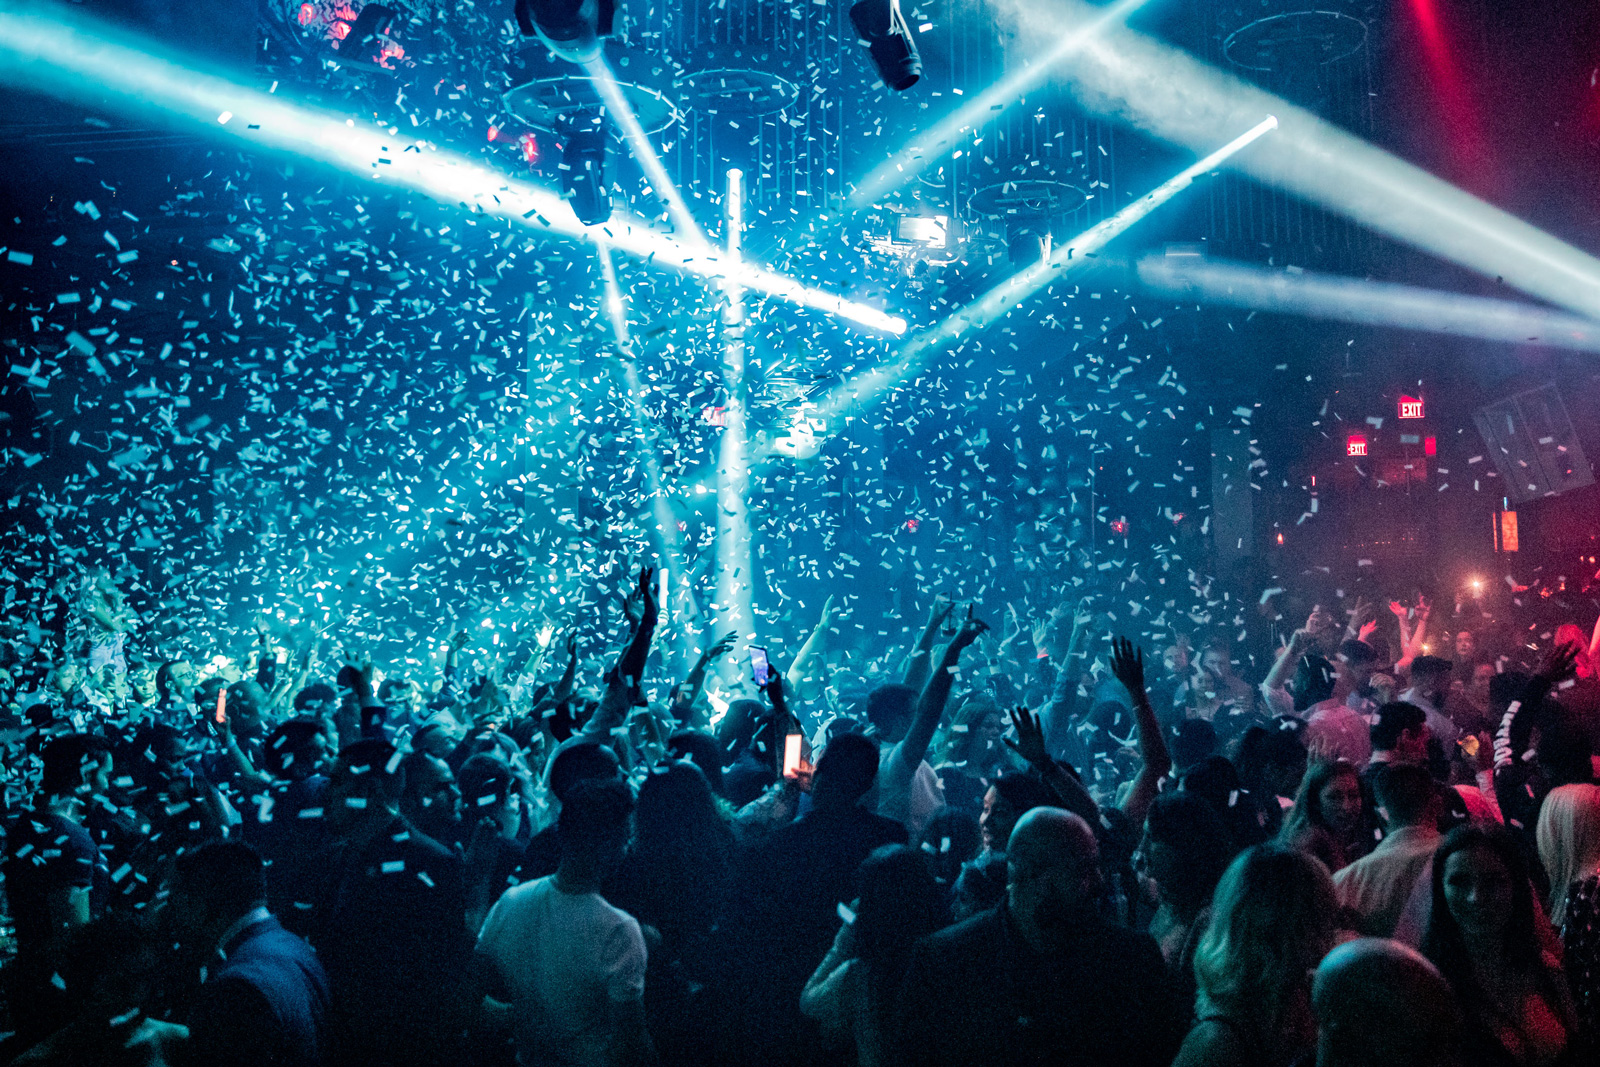 Celebrate New Year's Eve at Marquee Nightclub.